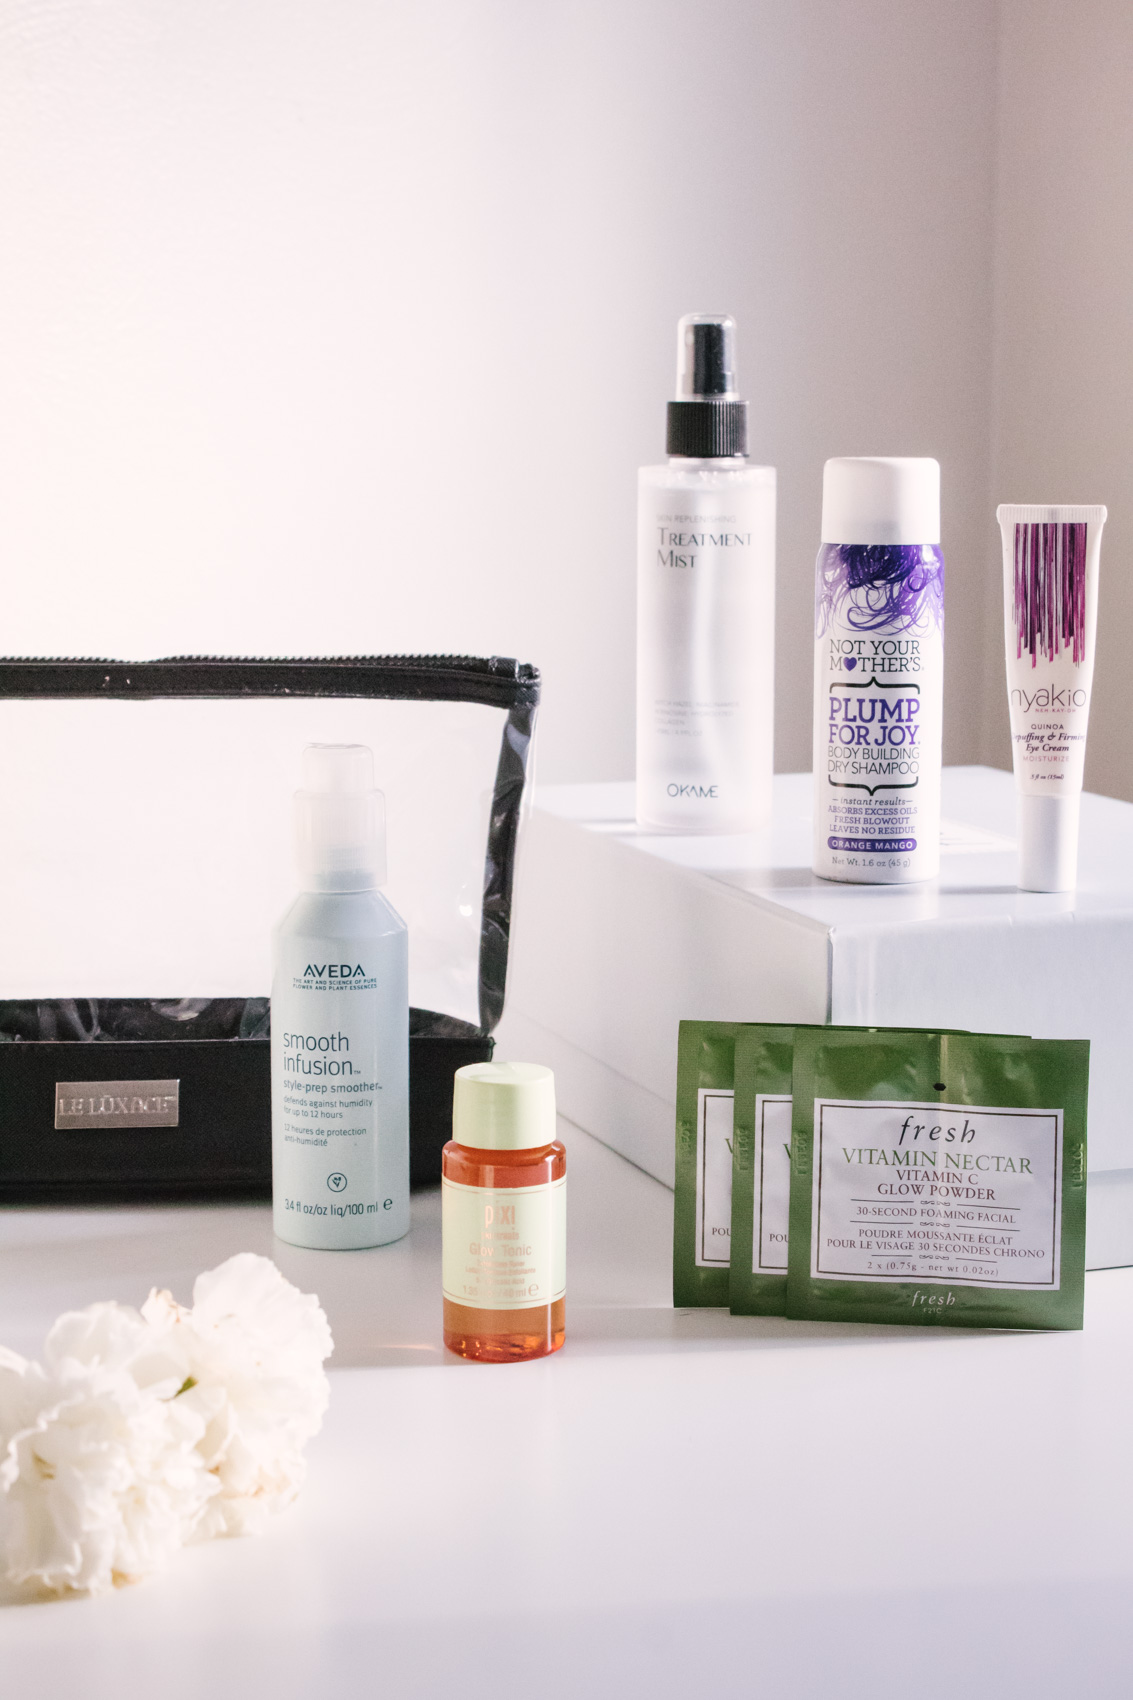 Next time you're packing for a trip, don't leave home without these 6 travel toiletries and travel beauty essentials to keep your skin fresh and protected!